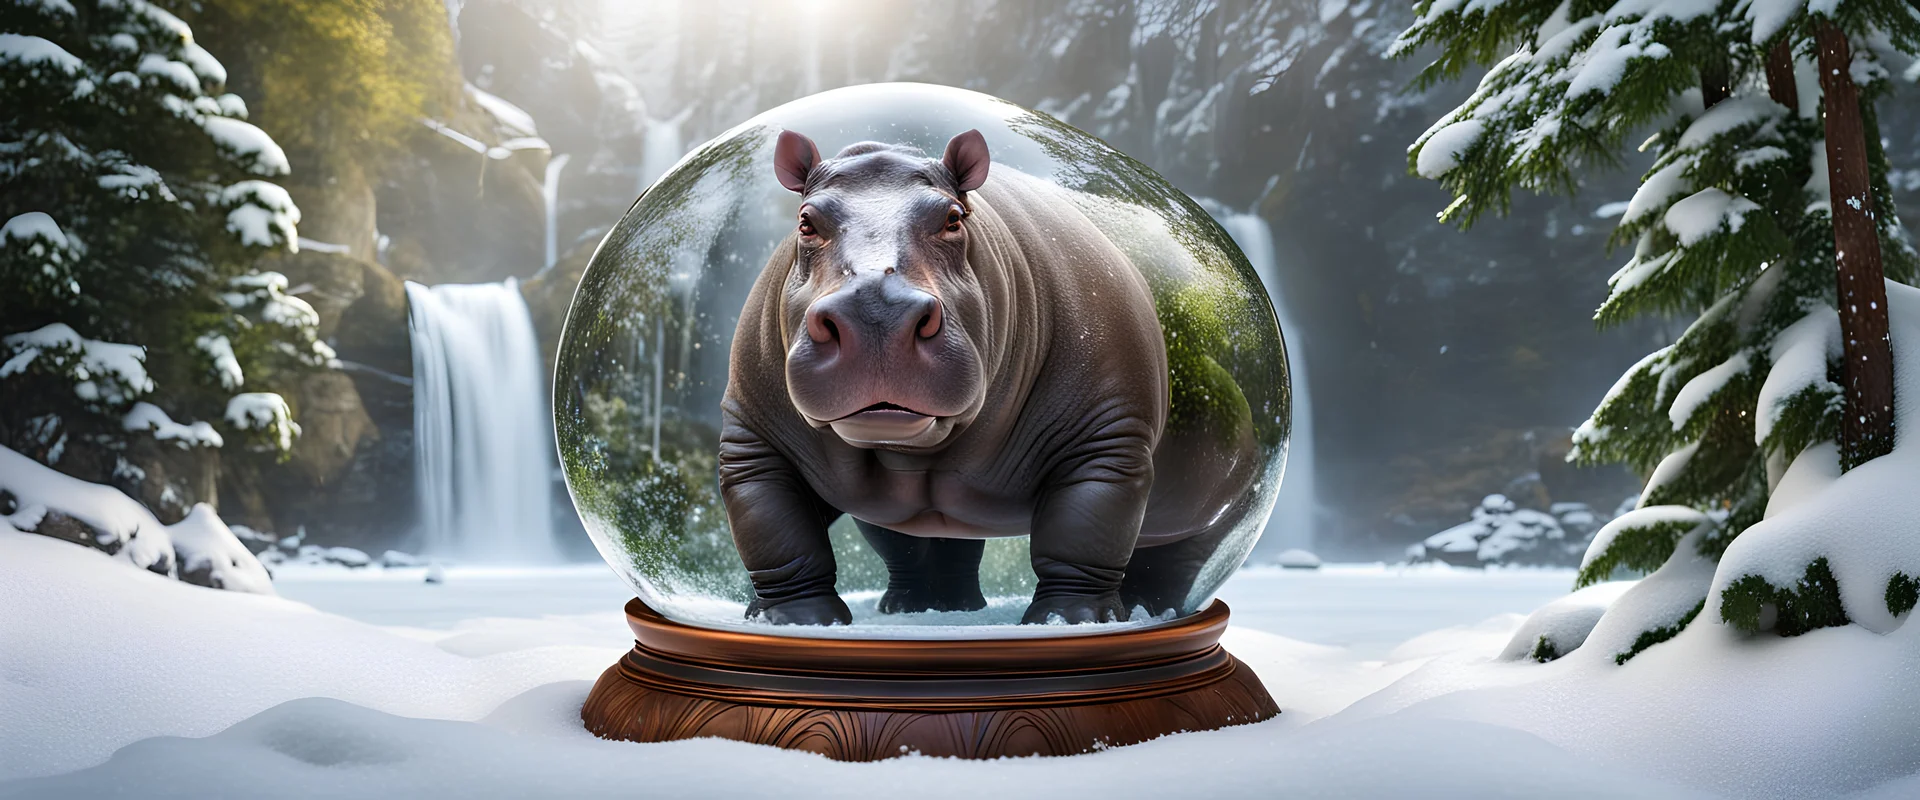 hippo in the snow with santa claus, forest alley waterfall background, close-up shot, all inside crystal ball, realistic,Highest quality telescopic Zeiss Zoom lens, supreme cinematic-quality photography, steel walnut wood green leather clothes, Art Nouveau-visuals,Vintage style Octane Render 3D technology,hyperrealism photography,(UHD) high-quality cinematic character render,Insanely detailed close-ups capturing beautiful complexity,Hyperdetailed,Intricate,